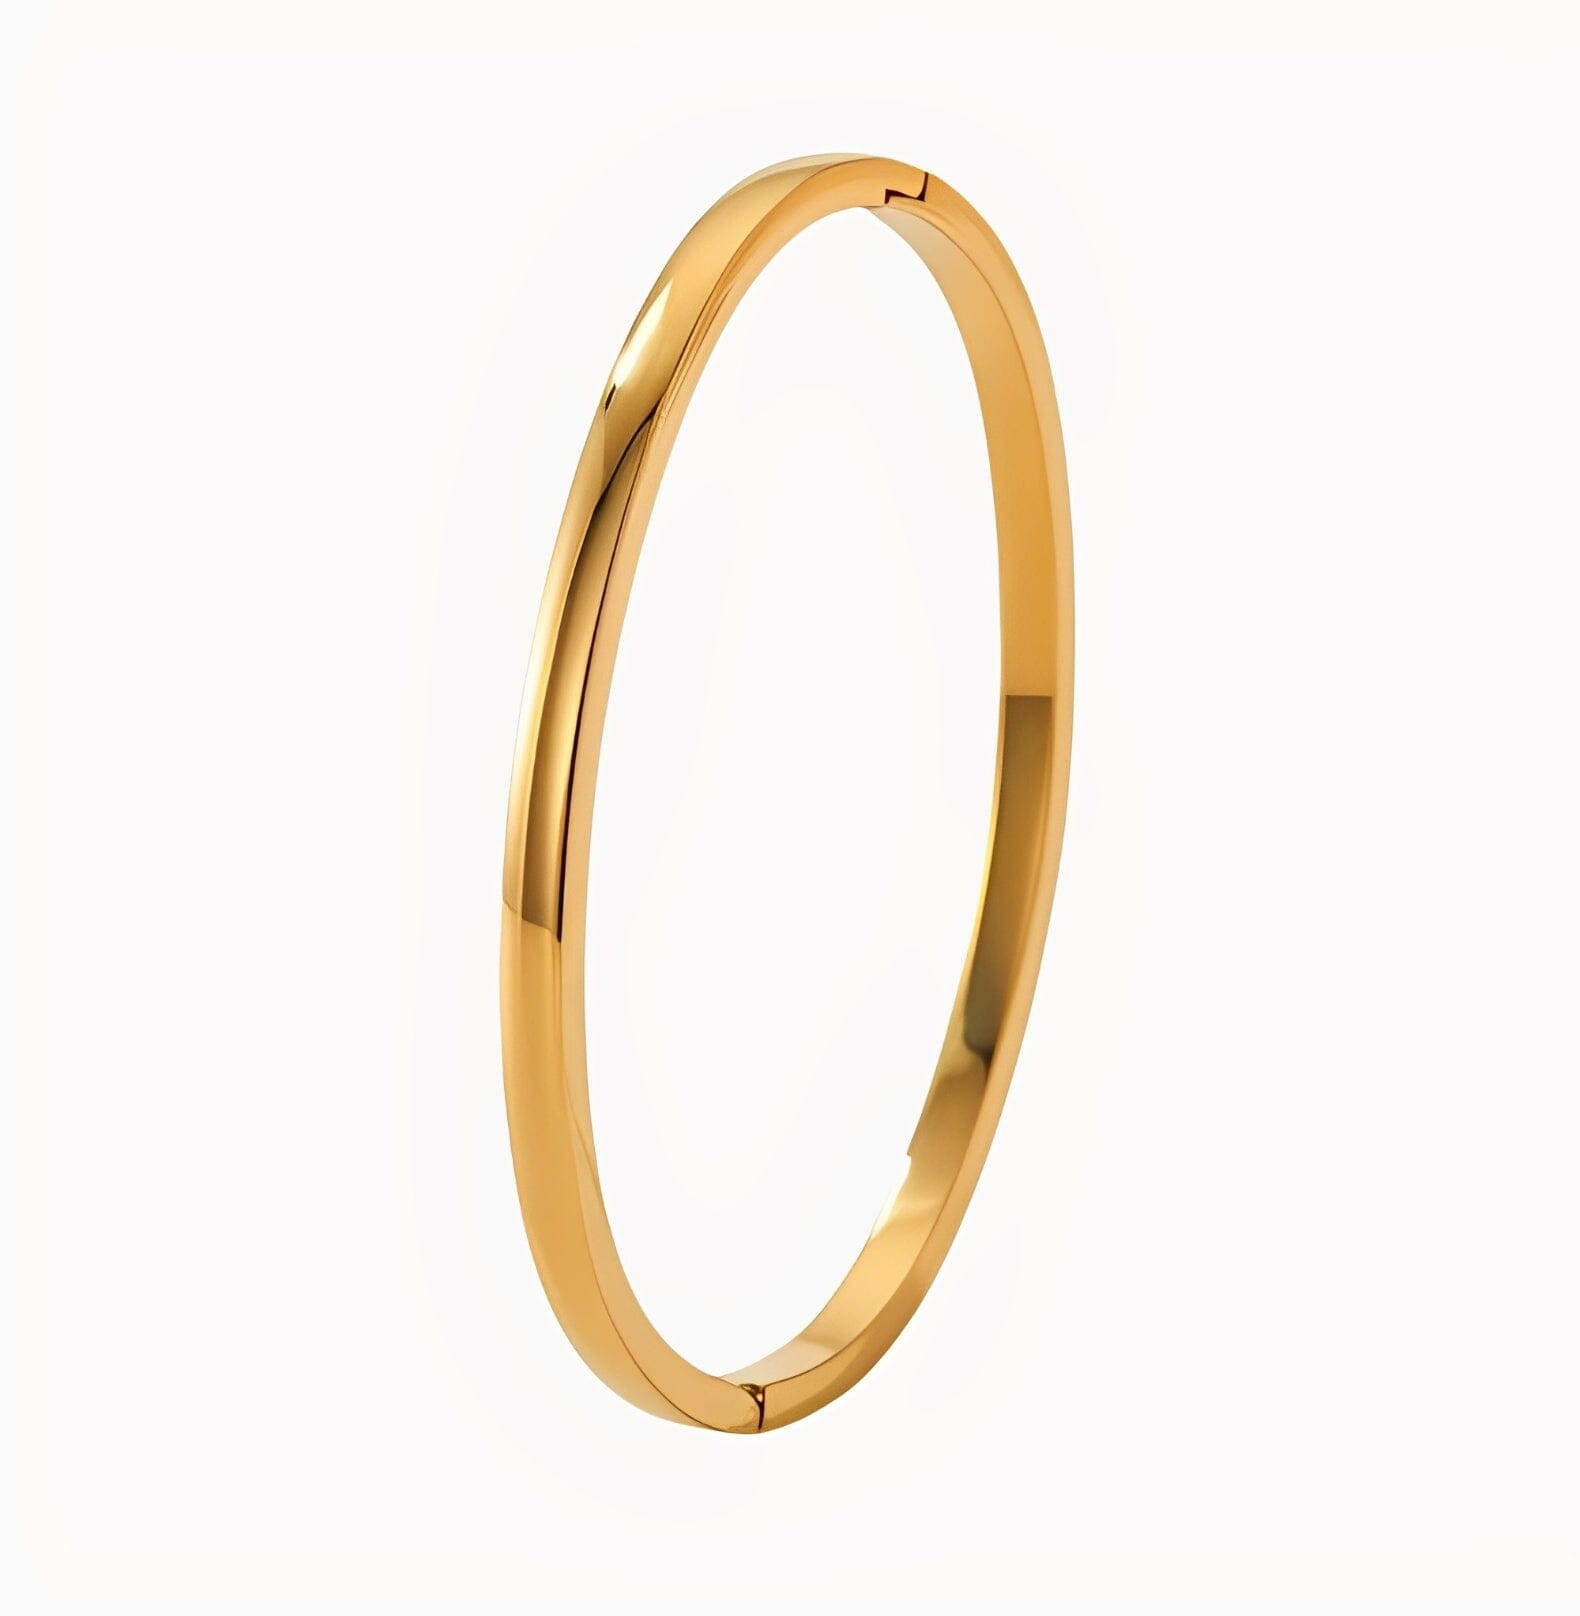 NADO BANGLE BRACELET braclet Yubama Jewelry Online Store - The Elegant Designs of Gold and Silver ! 